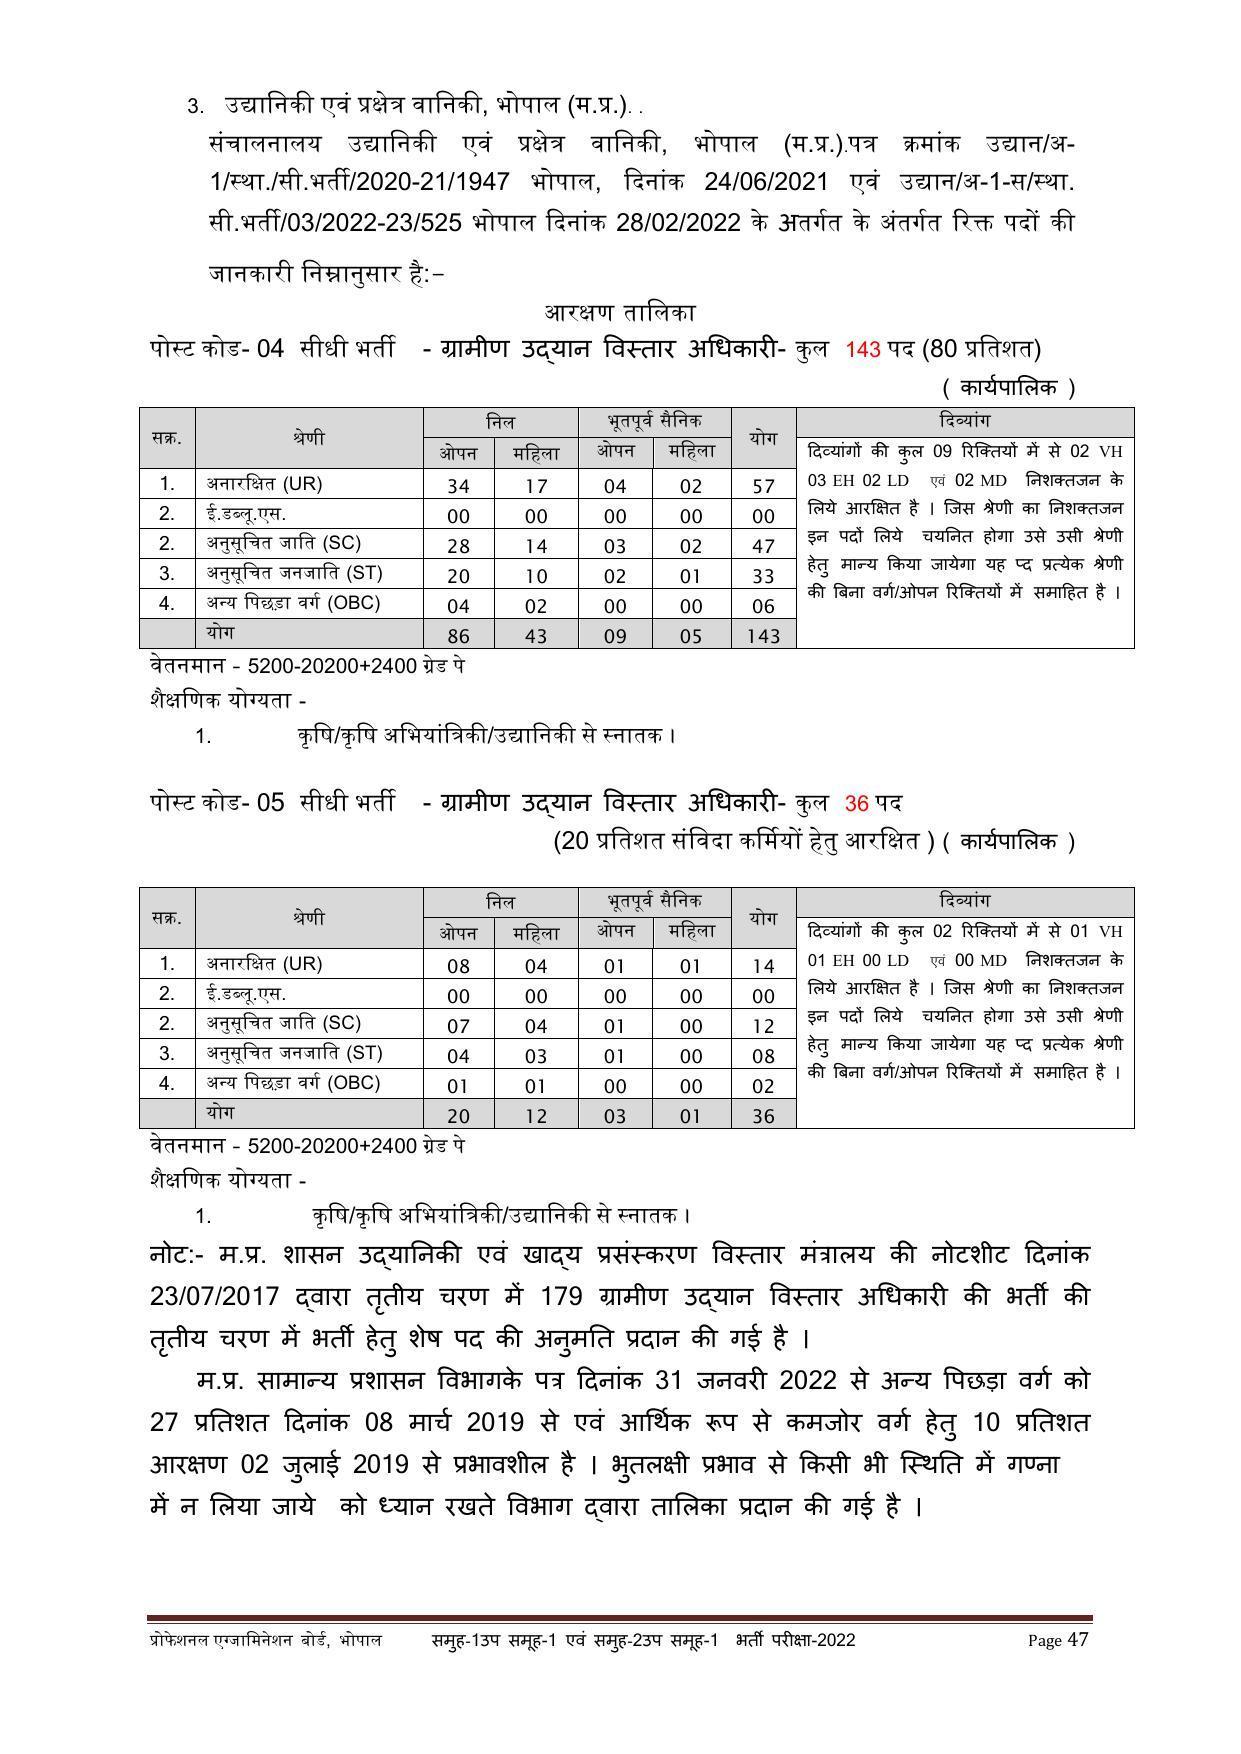 MPPEB Group-I Sub Group-I & Group-II Sub Group-I Recruitment 2022 - Page 43